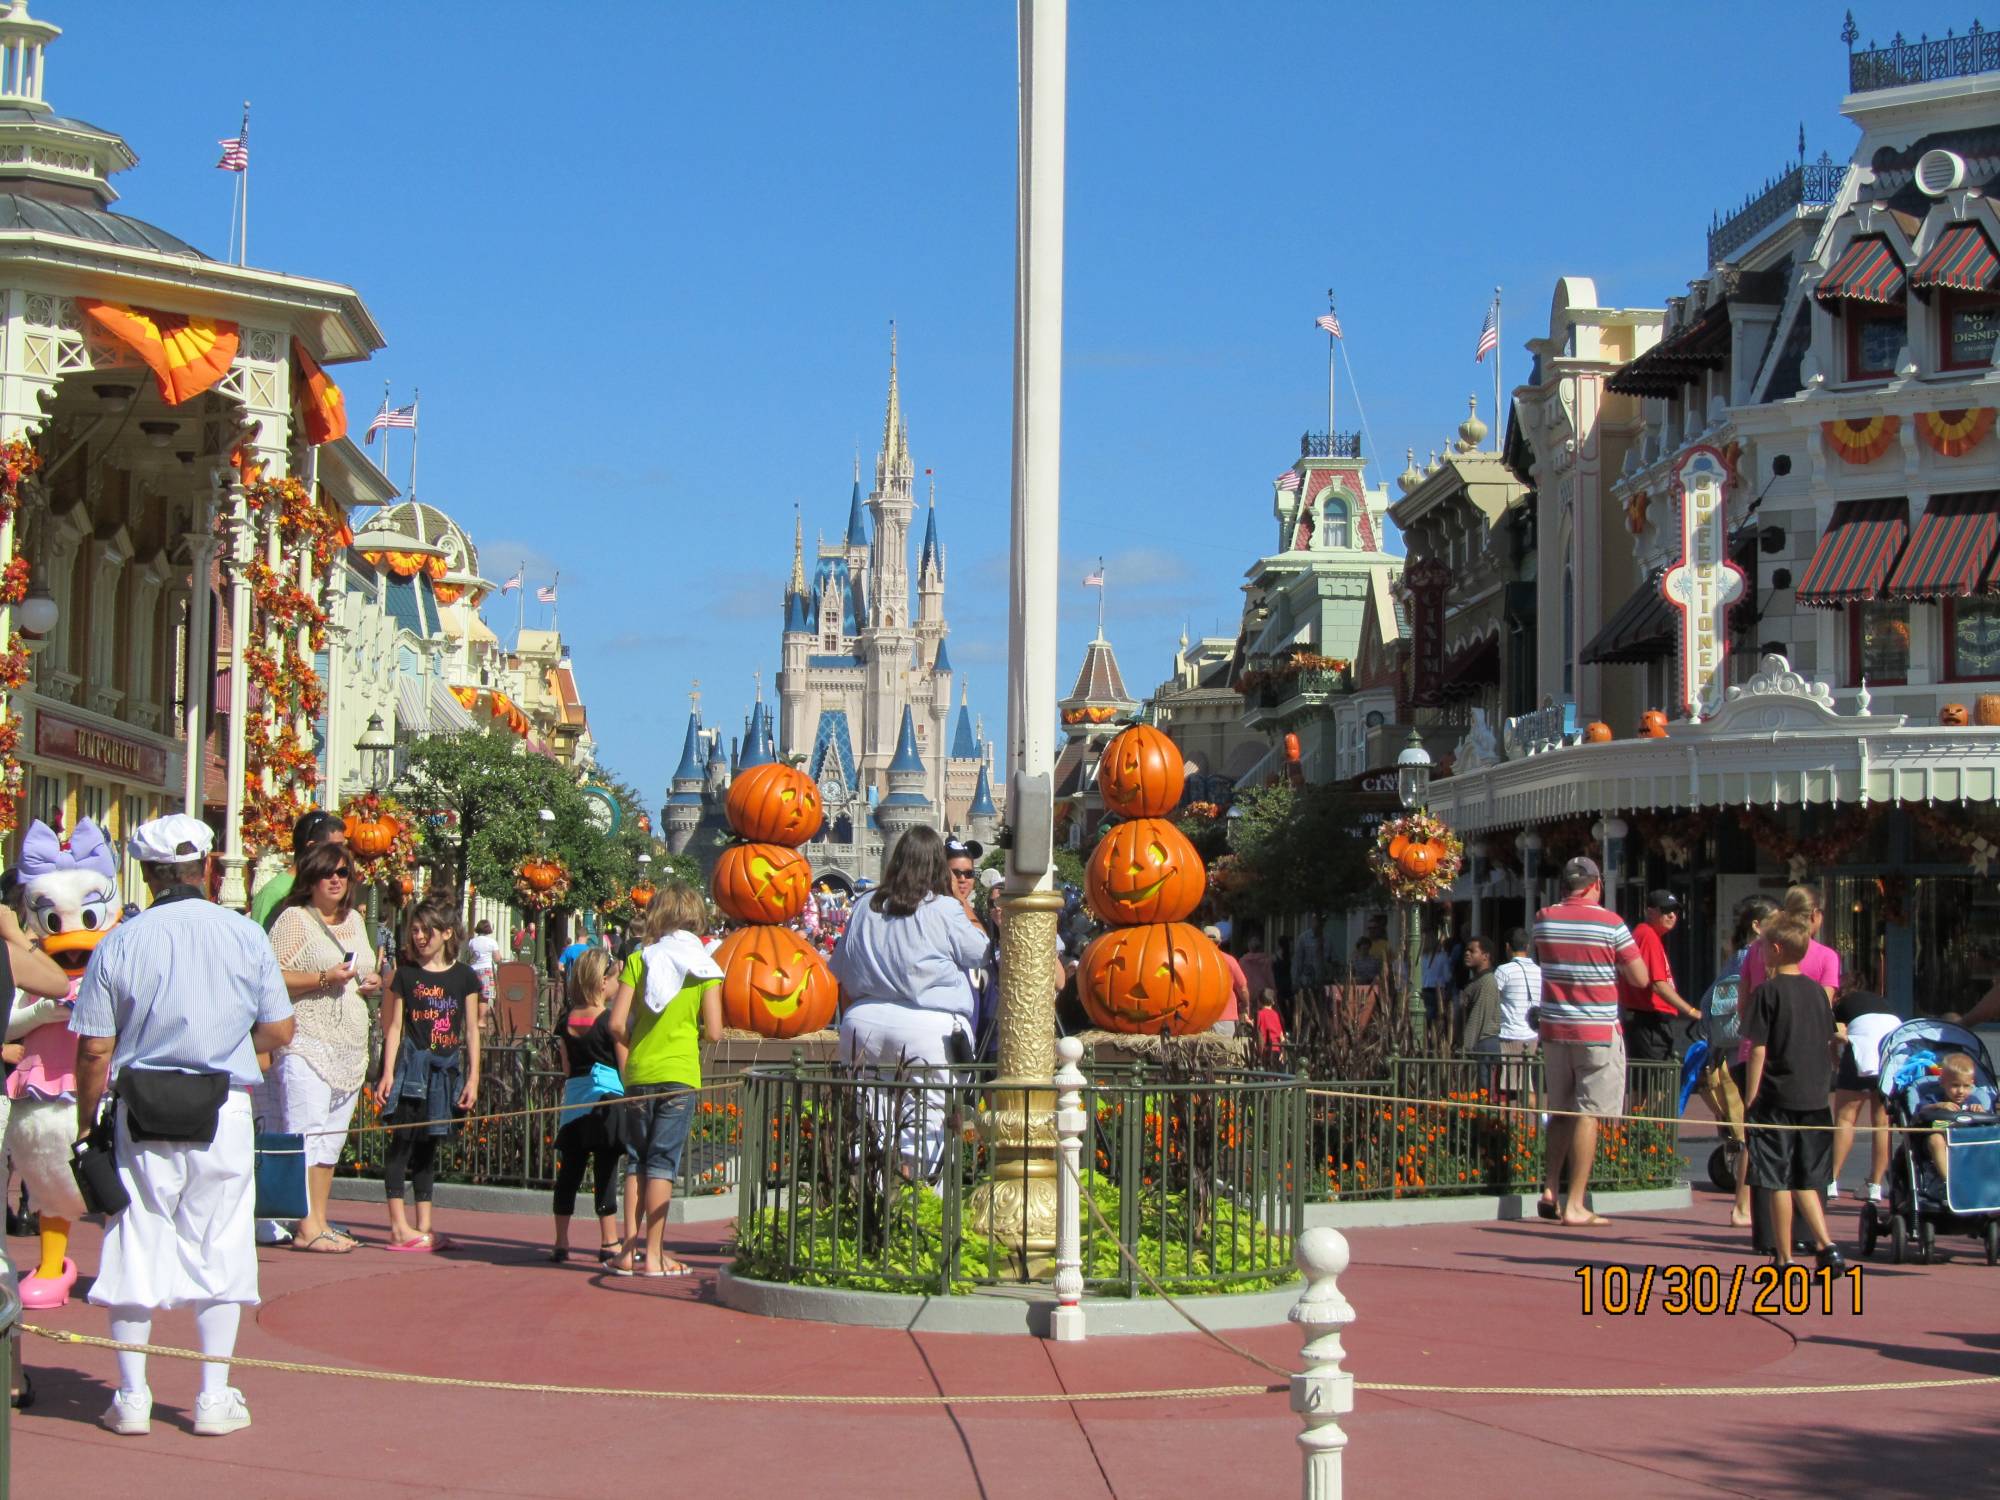 Main street decorated for Halloween